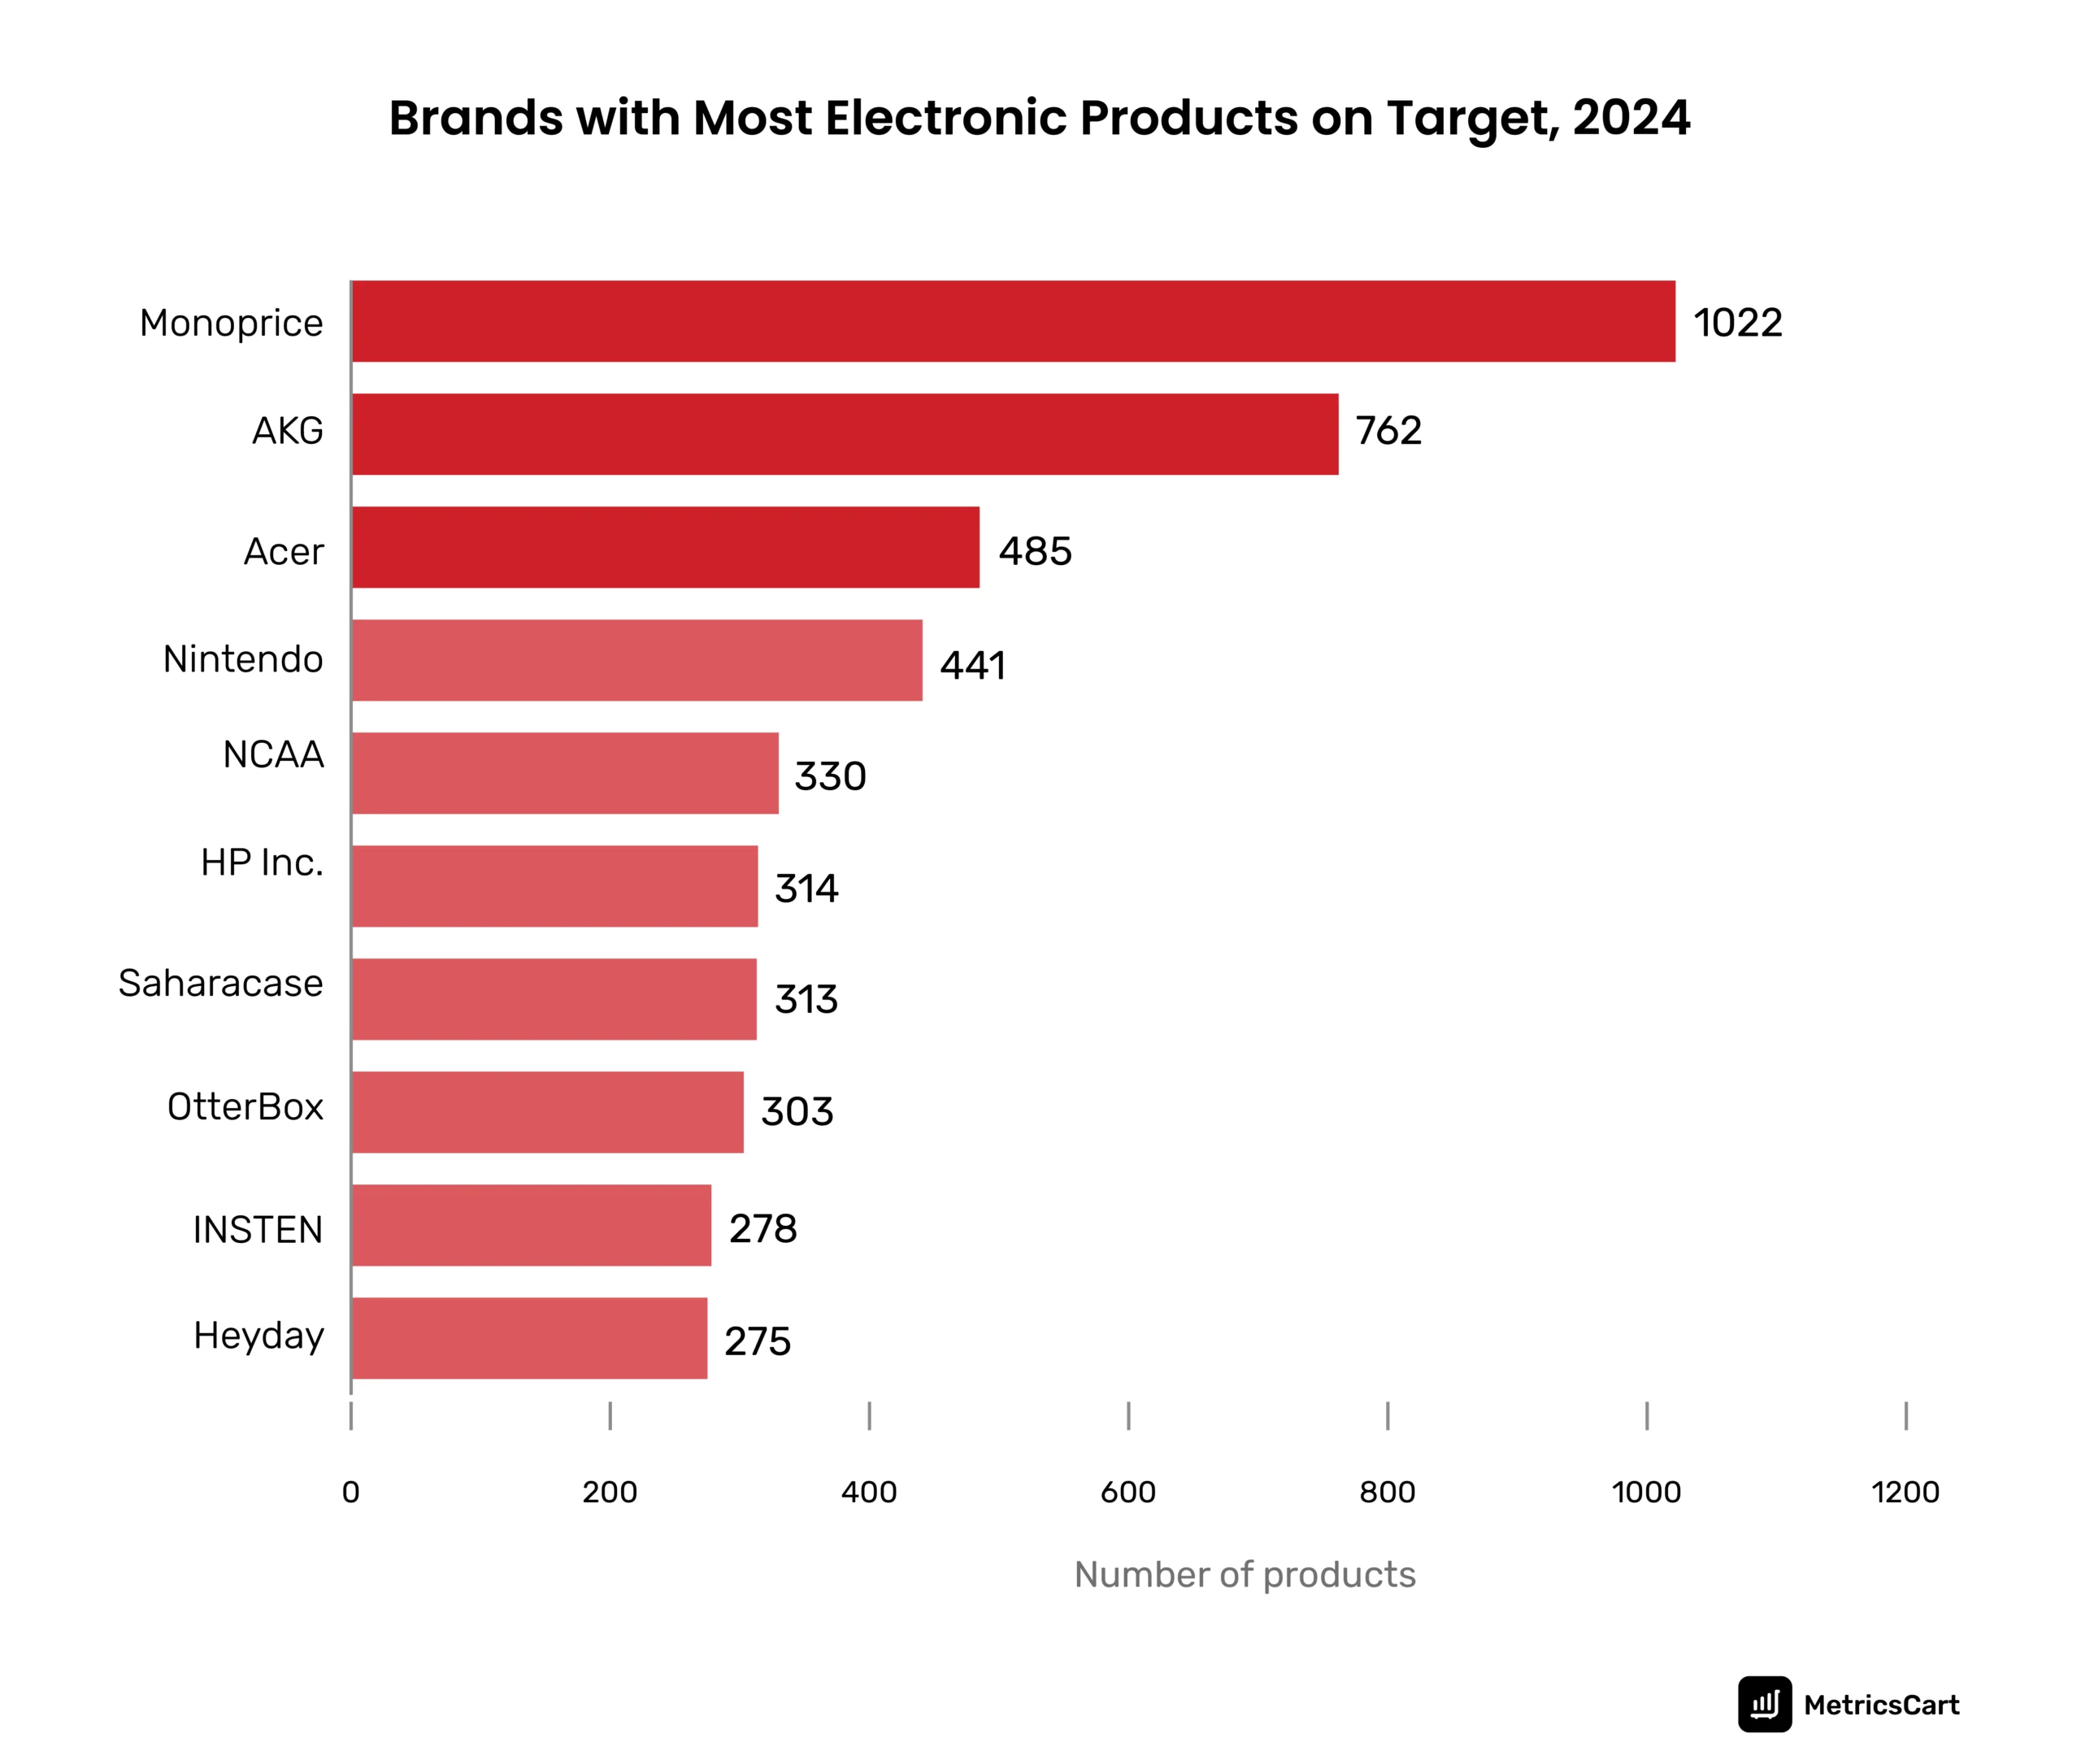 The graph shows the top 10 electronic brands with the most number of products on Target in 2024